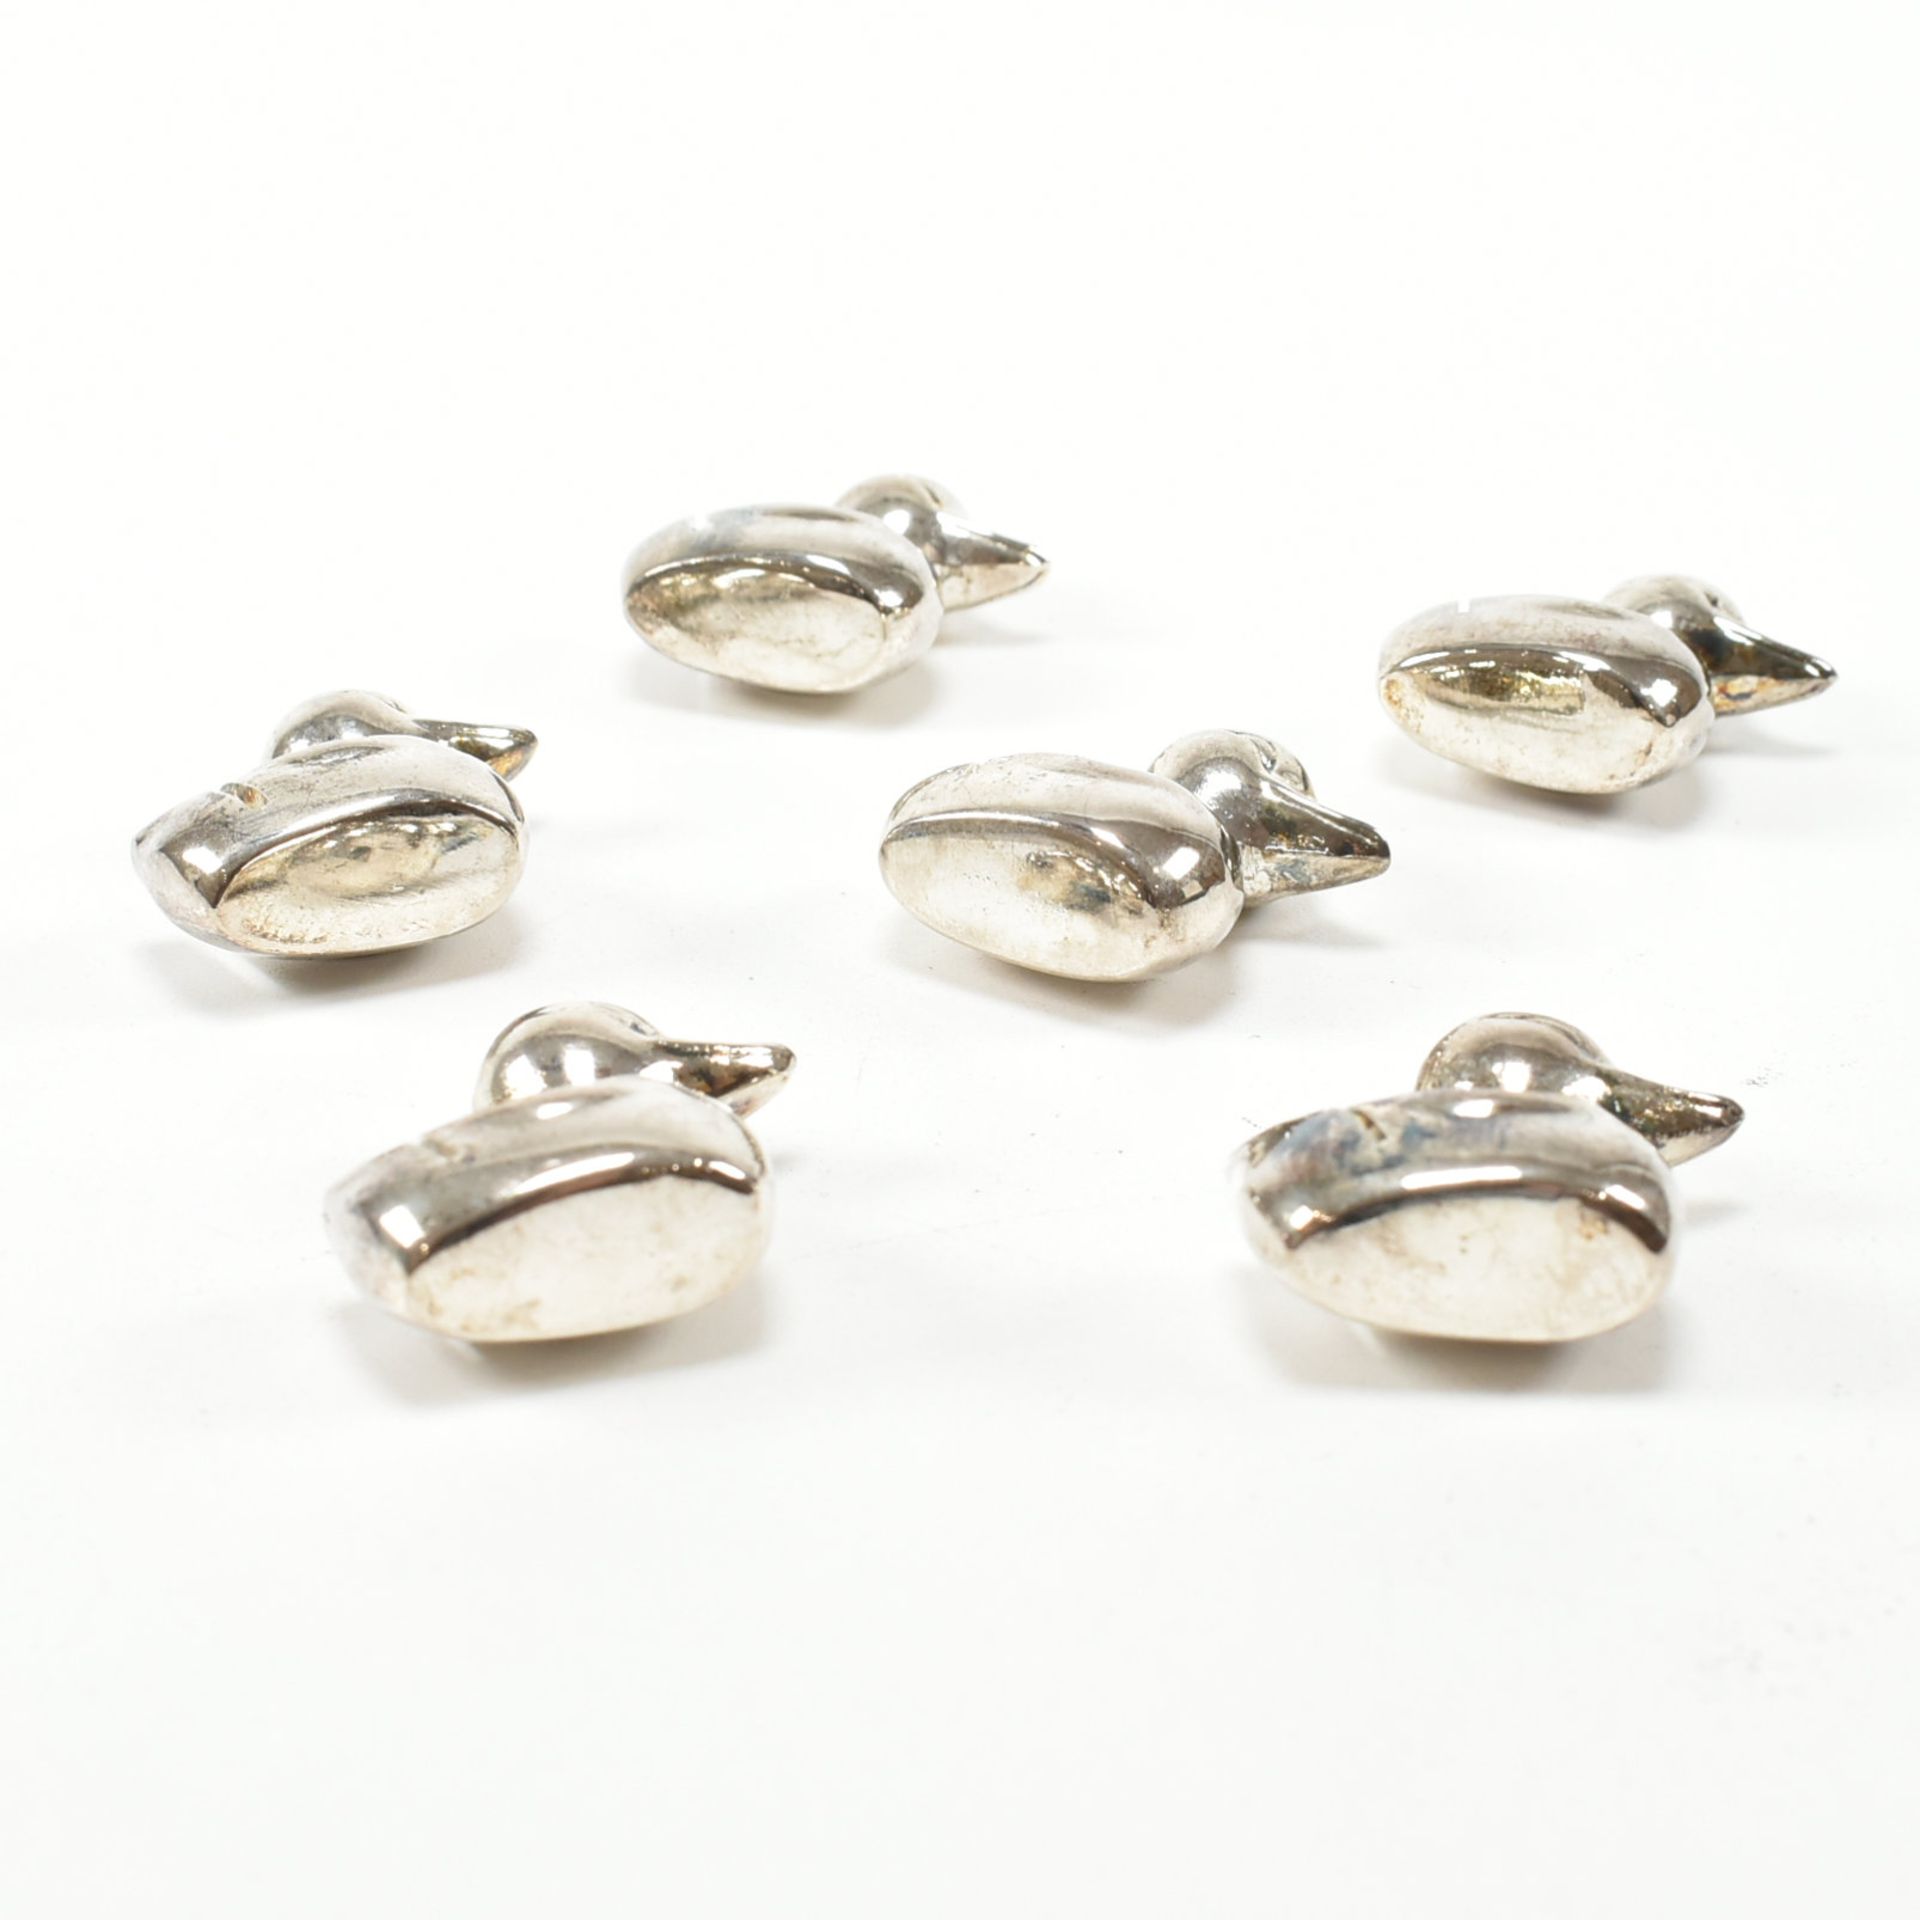 SET OF CONTEMPORARY NOVELTY DUCK SILVER PLATED PLACE CARD HOLDERS - Image 3 of 5